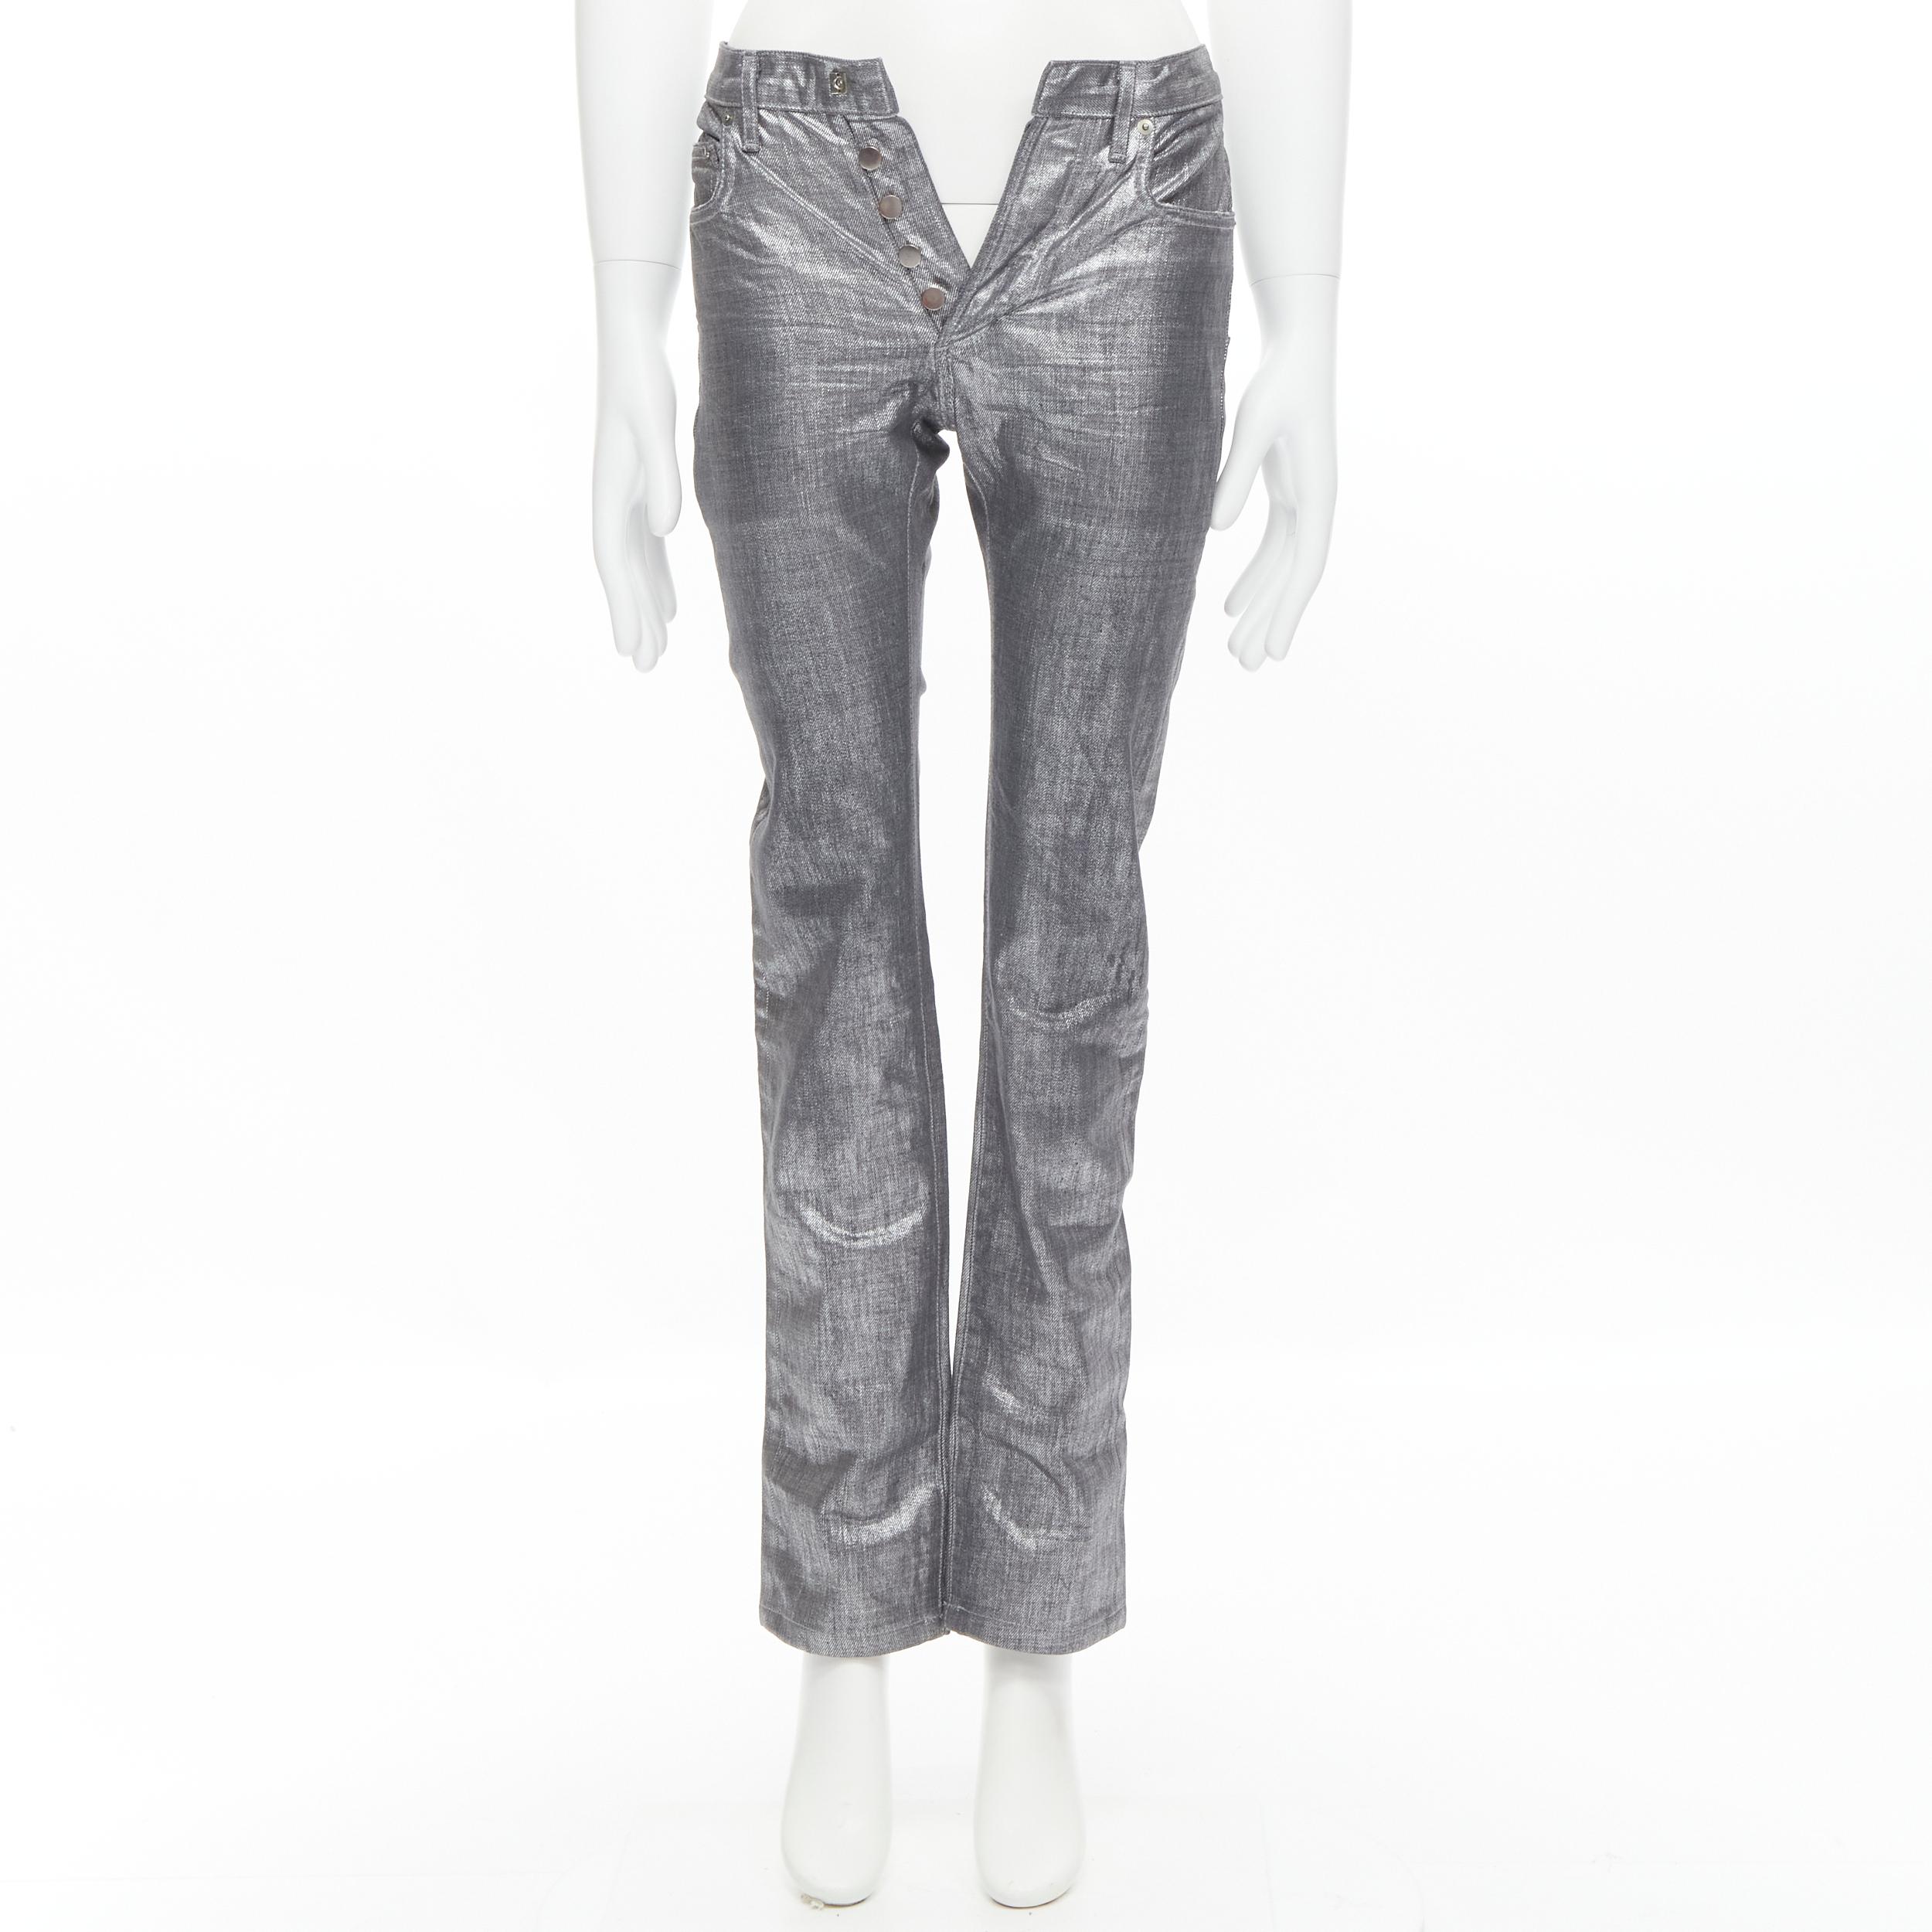 new DIOR HOMME Hedi Slimane 2006 Radioactive silver painted skinny jeans  2